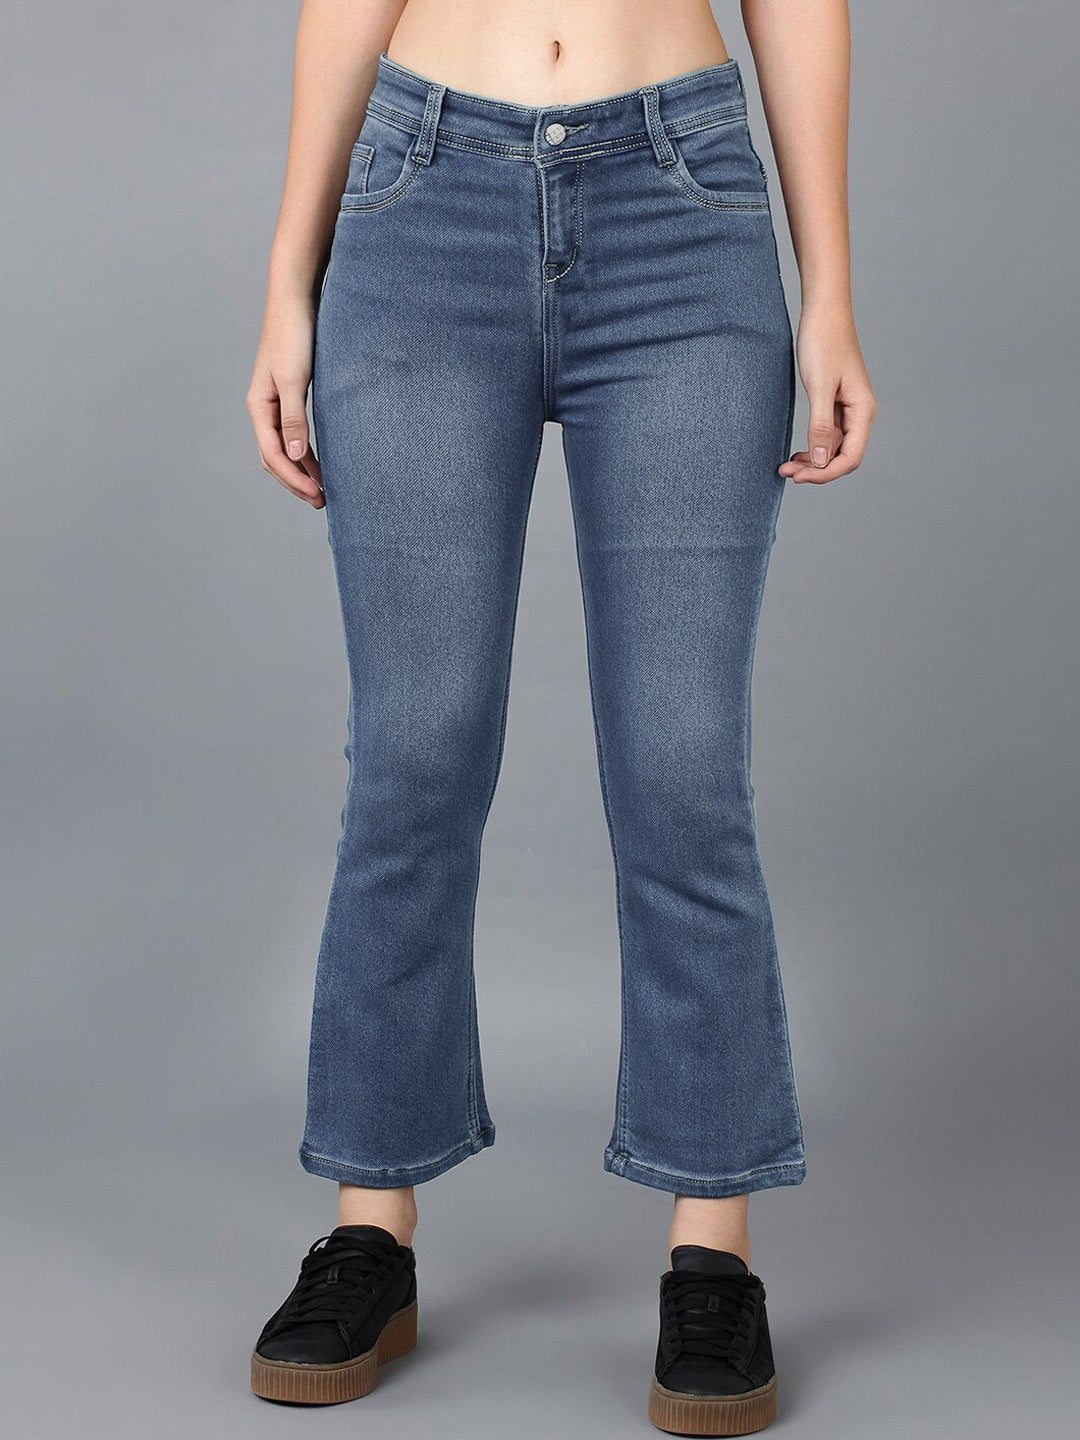 Crescent Jeans Denim For Women-Blue Faded-BE1316